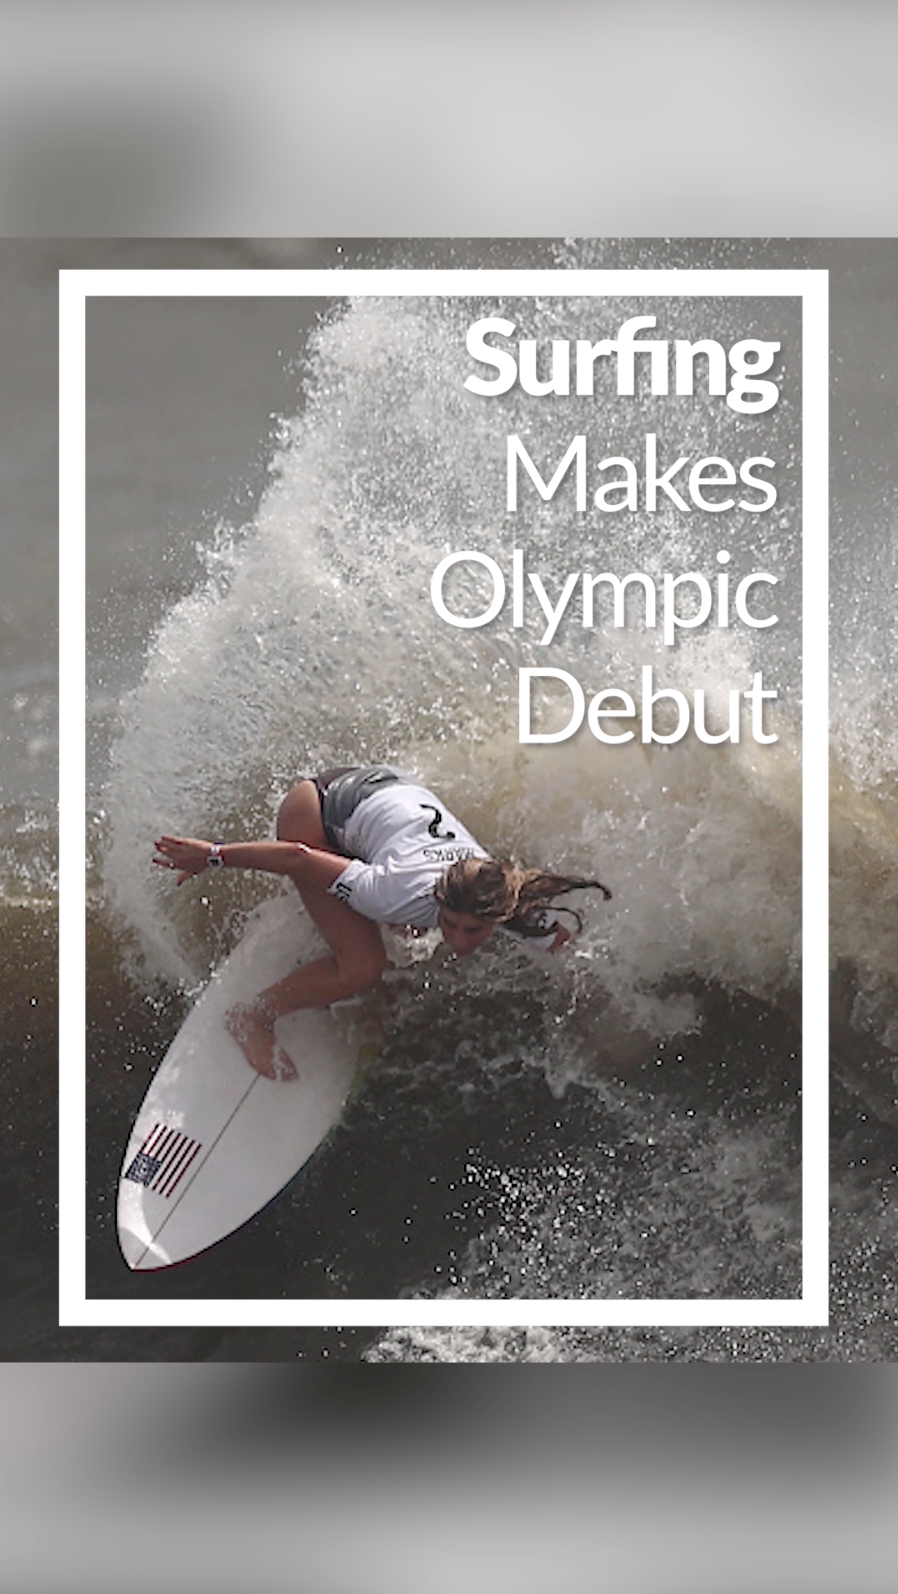 Surfing Makes Olympic Debut